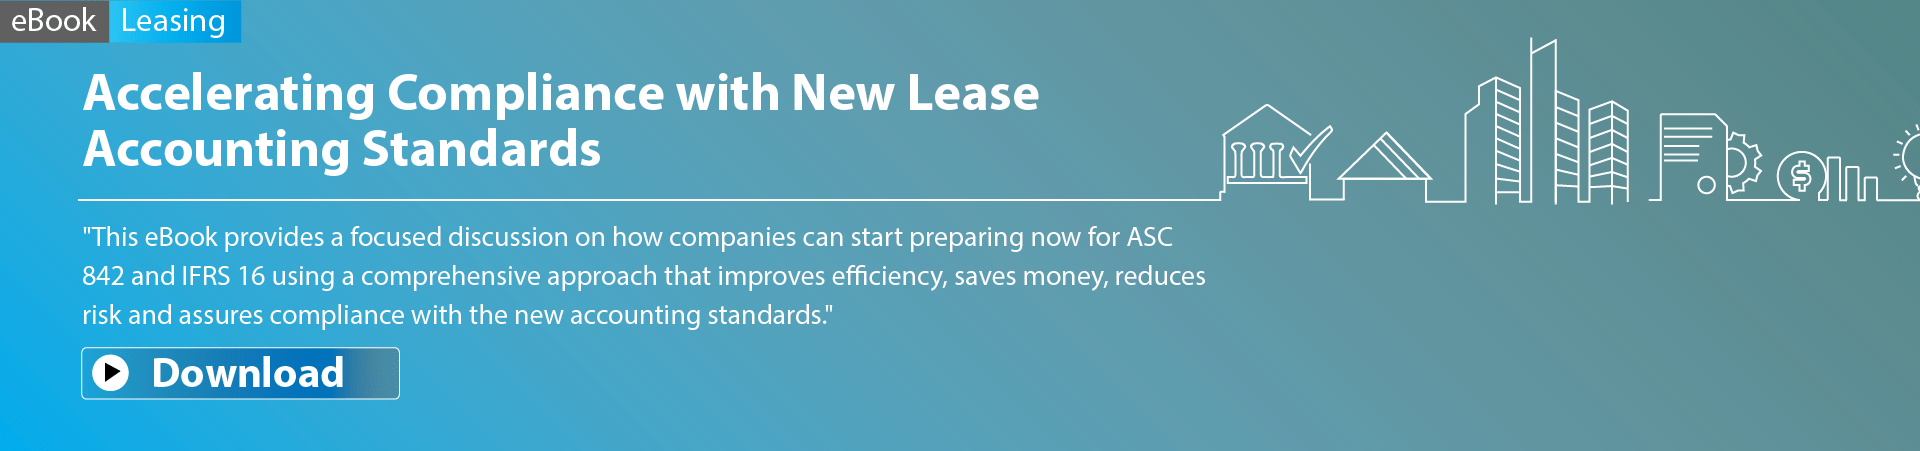 Accelerating Compliance with New Lease Accounting Standards